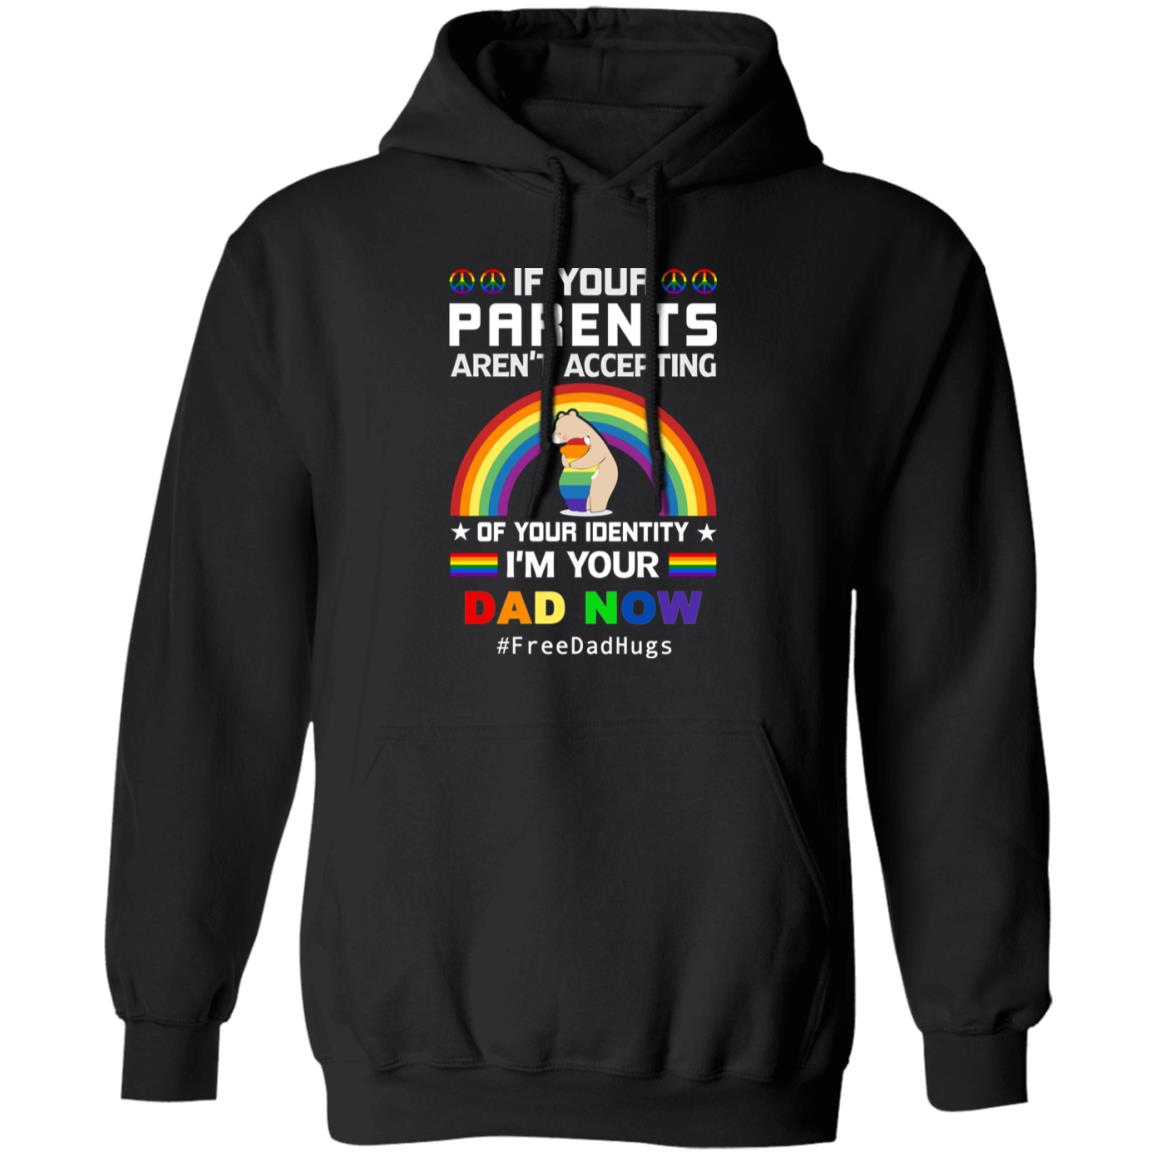 I'm your Dad Now - T shirt & Hoodie